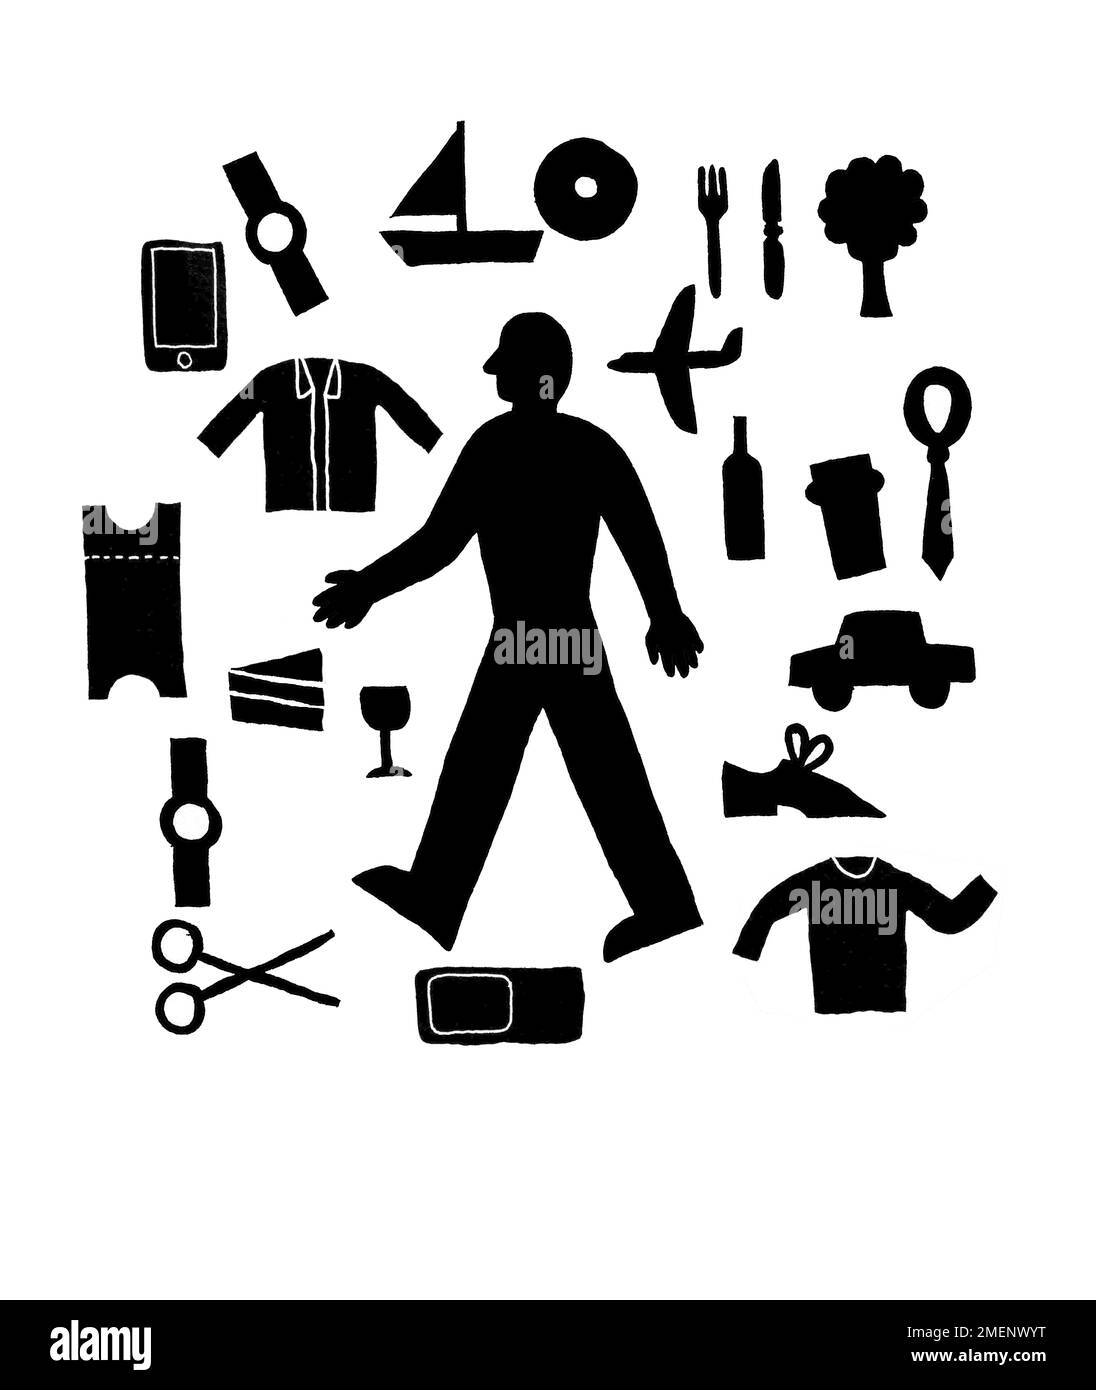 Black and white illustration of man surrounded by multitude of everyday objects and concerns Stock Photo